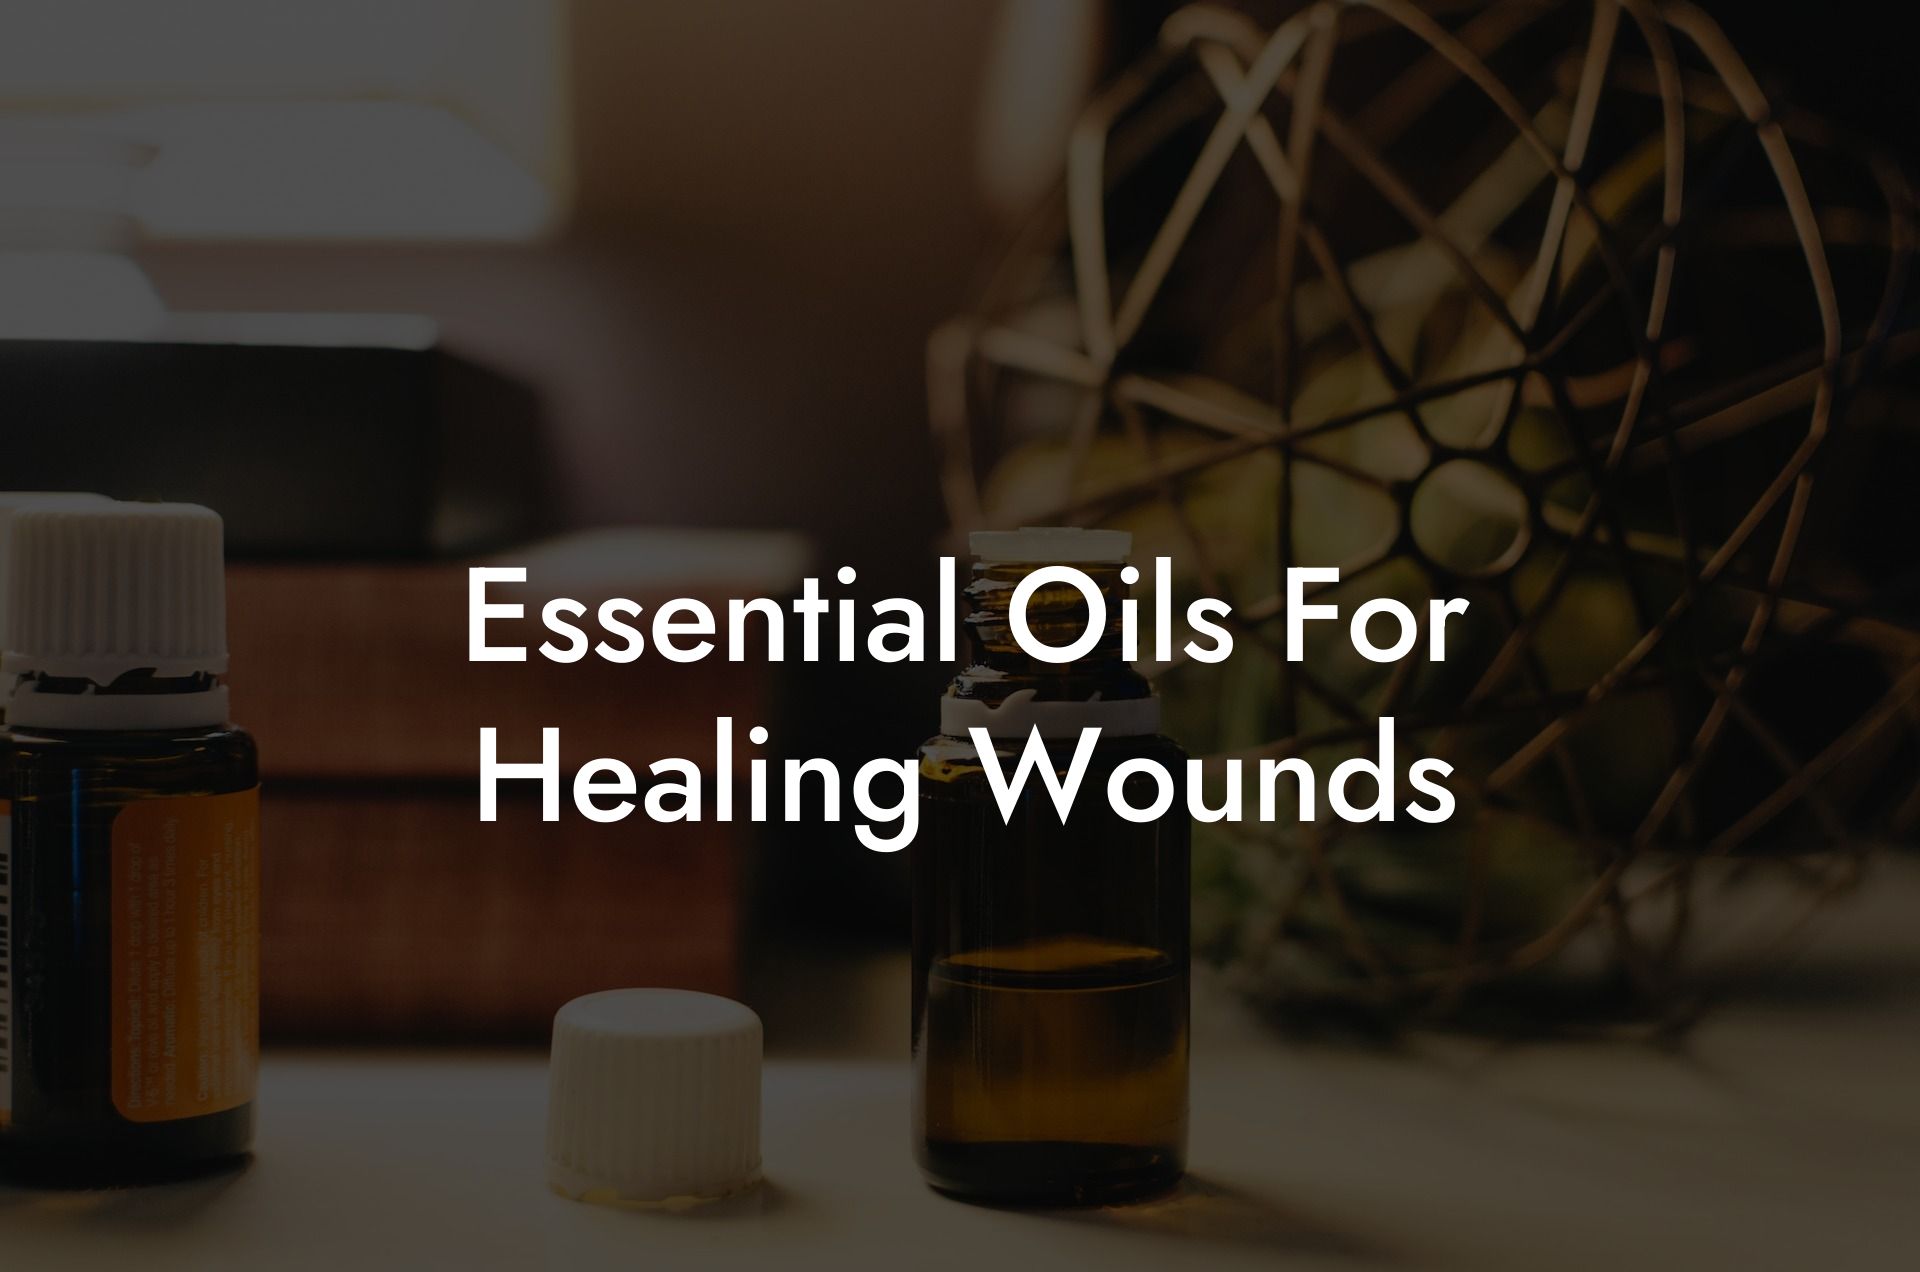 Essential Oils For Healing Wounds